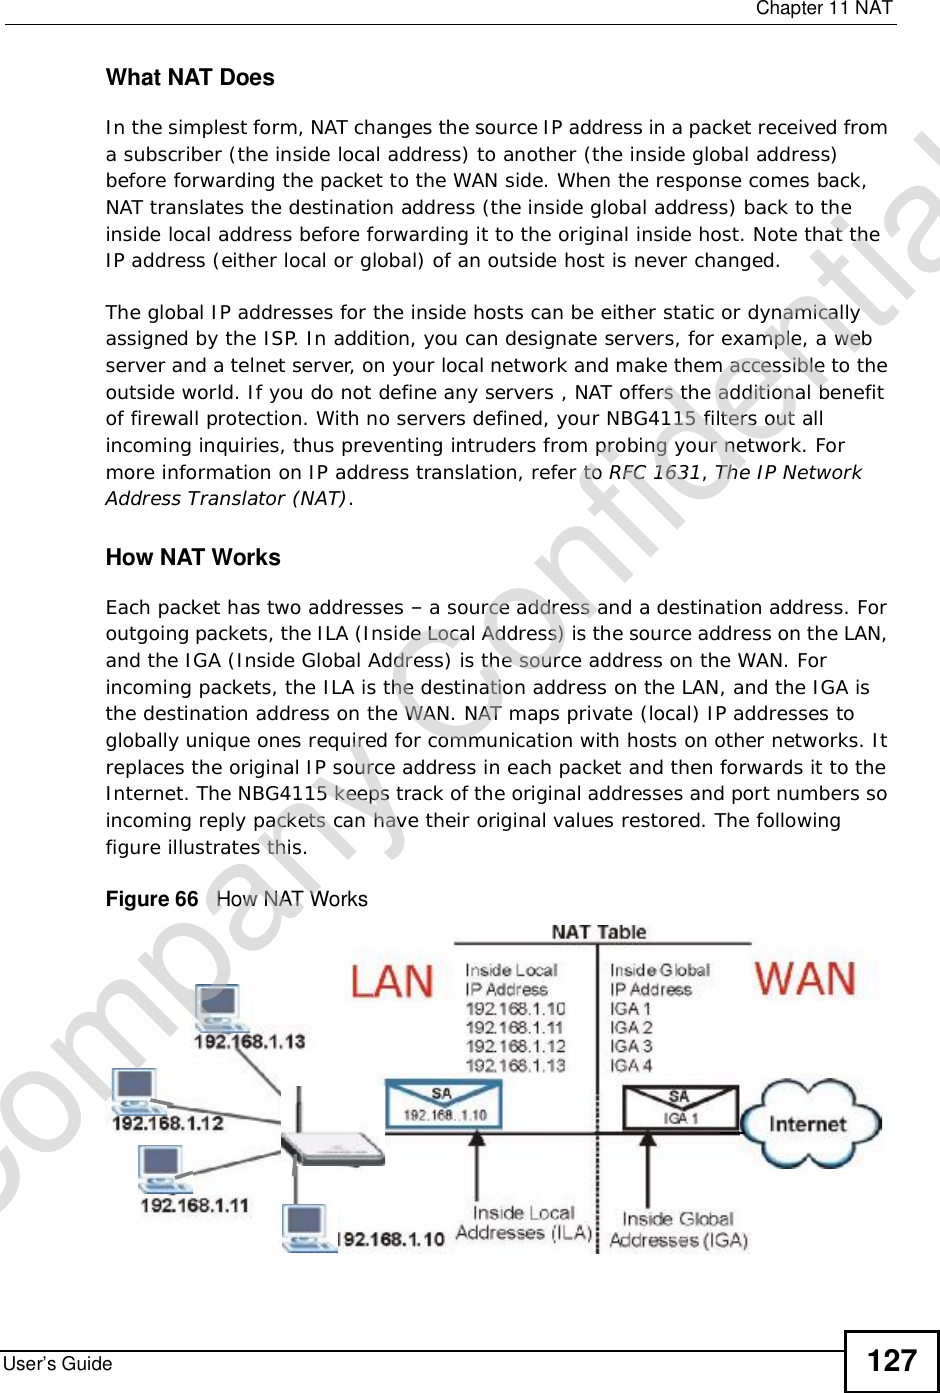  Chapter 11NATUser’s Guide 127What NAT DoesIn the simplest form, NAT changes the source IP address in a packet received from a subscriber (the inside local address) to another (the inside global address) before forwarding the packet to the WAN side. When the response comes back, NAT translates the destination address (the inside global address) back to the inside local address before forwarding it to the original inside host. Note that the IP address (either local or global) of an outside host is never changed.The global IP addresses for the inside hosts can be either static or dynamically assigned by the ISP. In addition, you can designate servers, for example, a web server and a telnet server, on your local network and make them accessible to the outside world. If you do not define any servers , NAT offers the additional benefit of firewall protection. With no servers defined, your NBG4115 filters out all incoming inquiries, thus preventing intruders from probing your network. For more information on IP address translation, refer to RFC 1631,The IP Network Address Translator (NAT).How NAT WorksEach packet has two addresses – a source address and a destination address. For outgoing packets, the ILA (Inside Local Address) is the source address on the LAN, and the IGA (Inside Global Address) is the source address on the WAN. For incoming packets, the ILA is the destination address on the LAN, and the IGA is the destination address on the WAN. NAT maps private (local) IP addresses to globally unique ones required for communication with hosts on other networks. It replaces the original IP source address in each packet and then forwards it to the Internet. The NBG4115 keeps track of the original addresses and port numbers so incoming reply packets can have their original values restored. The following figure illustrates this.Figure 66   How NAT WorksCompany Confidential